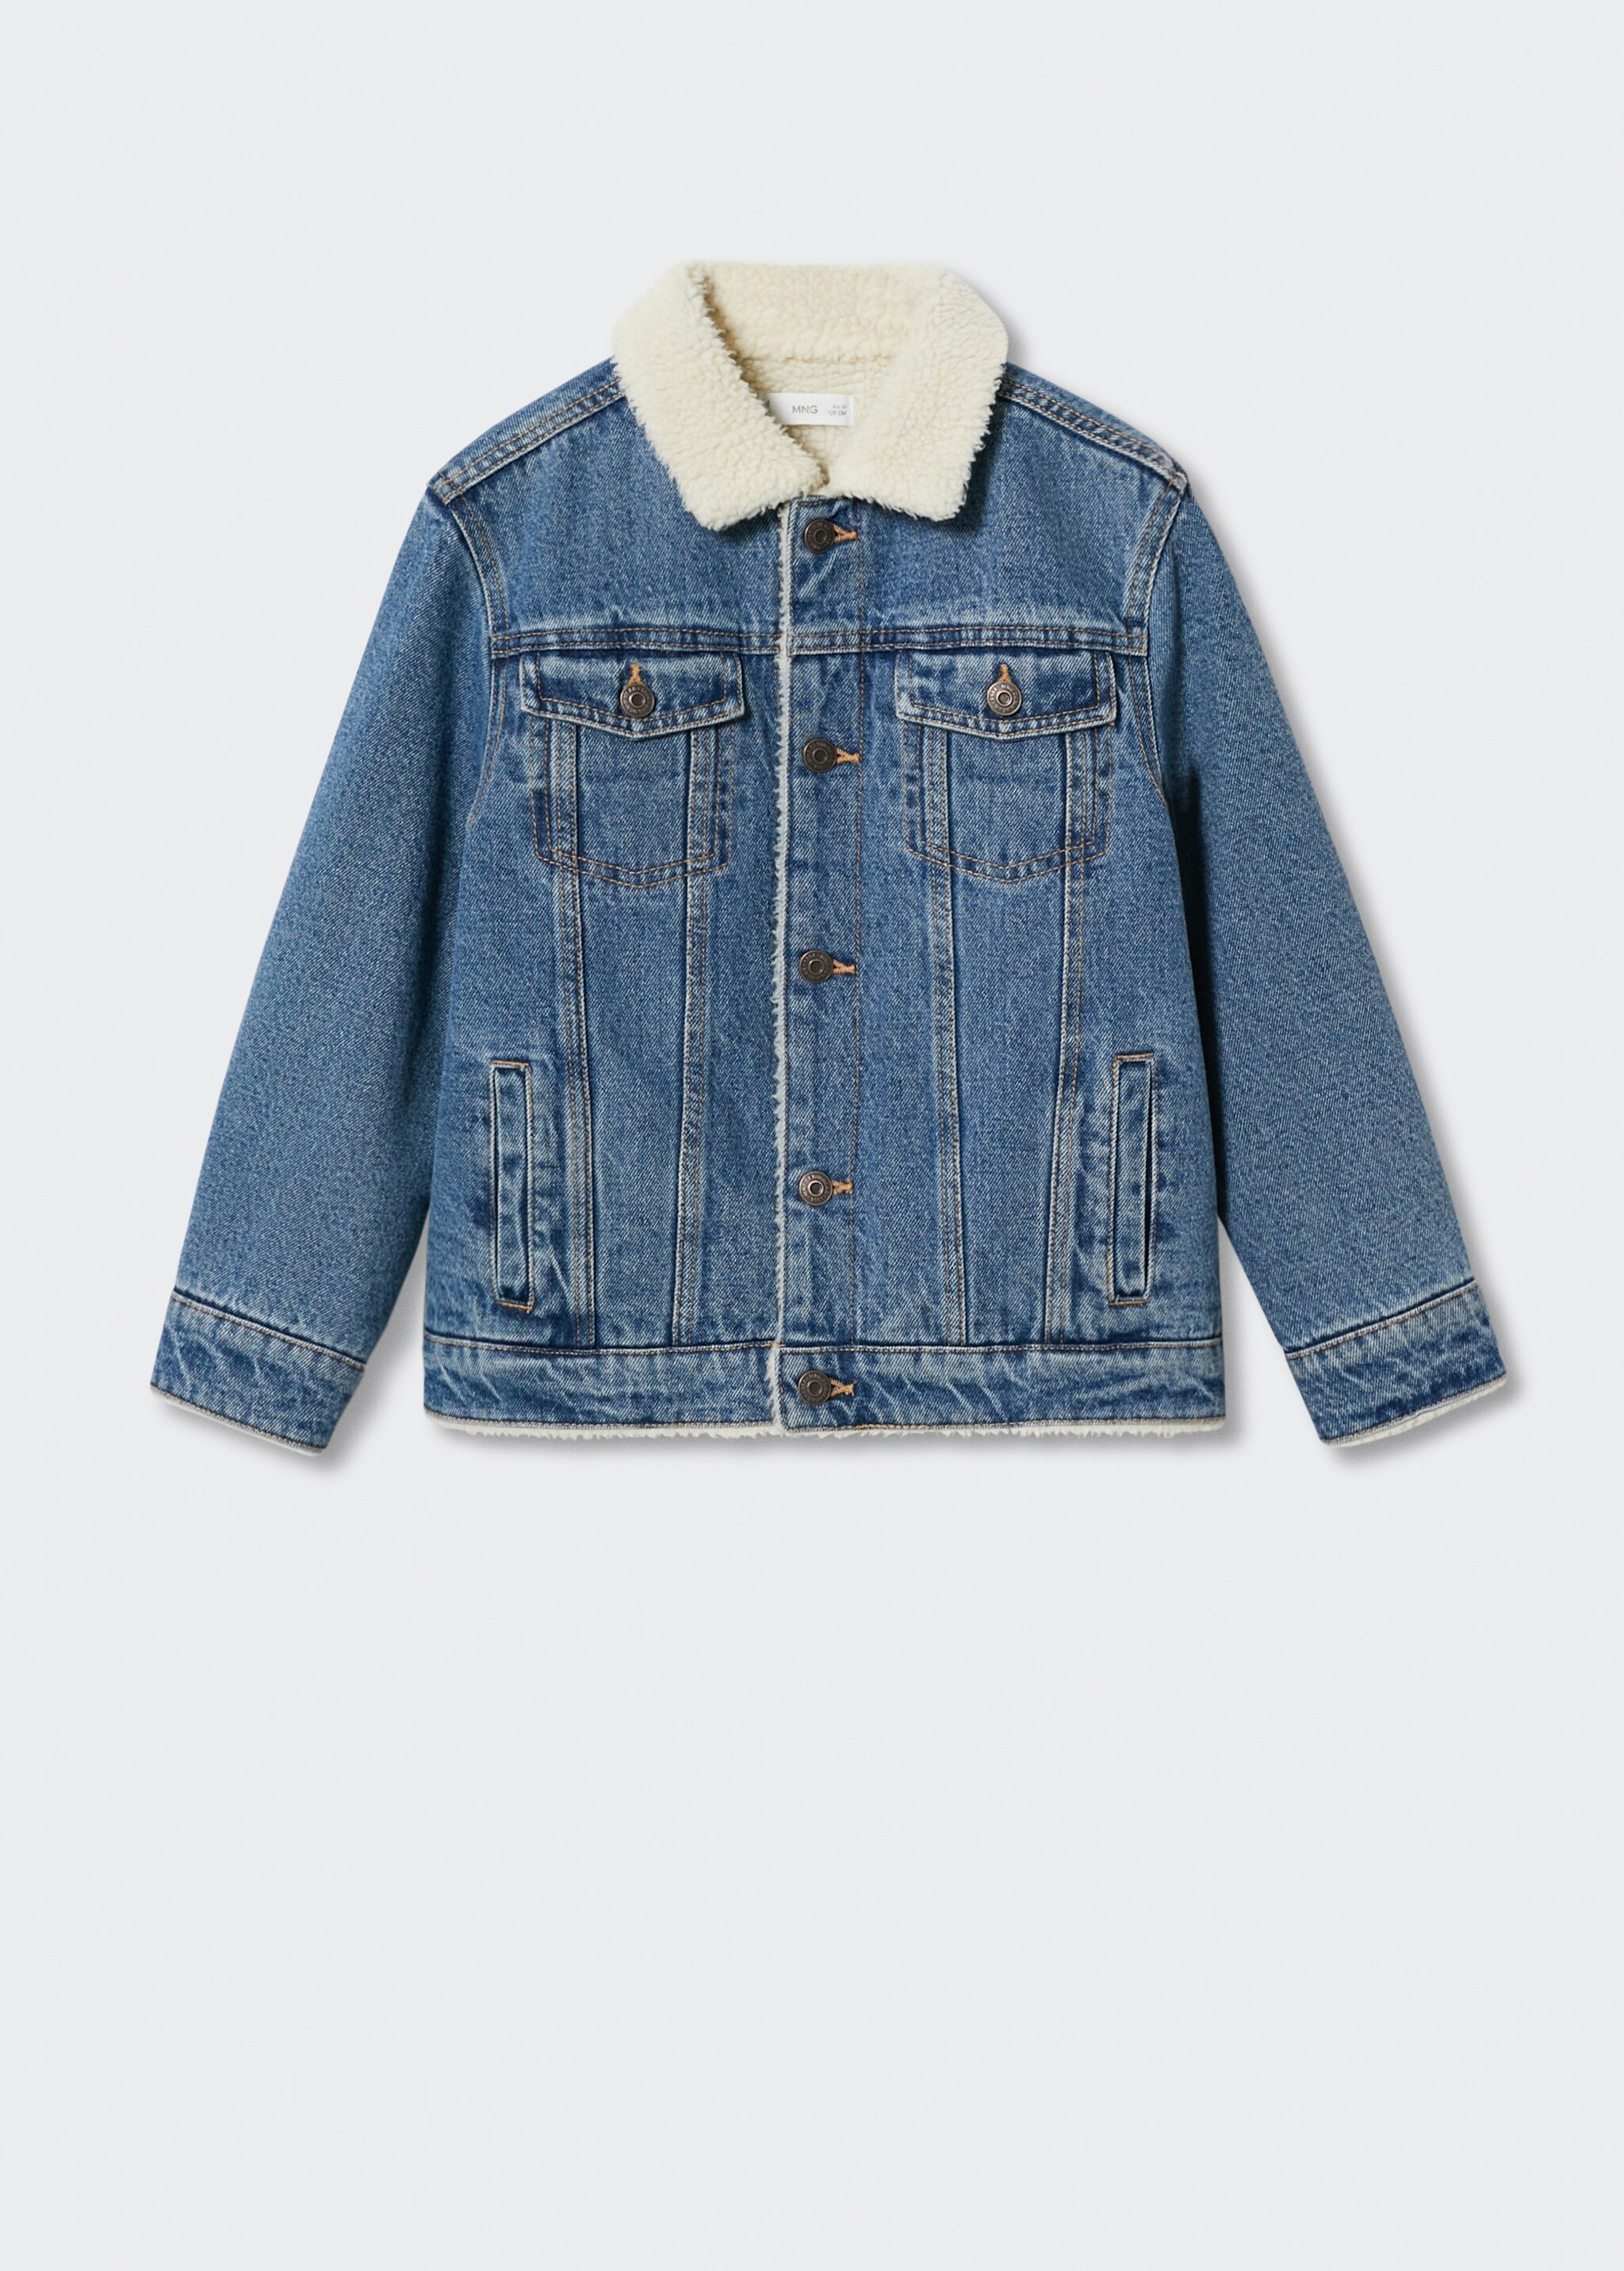 Faux shearling-lined denim jacket - Article without model